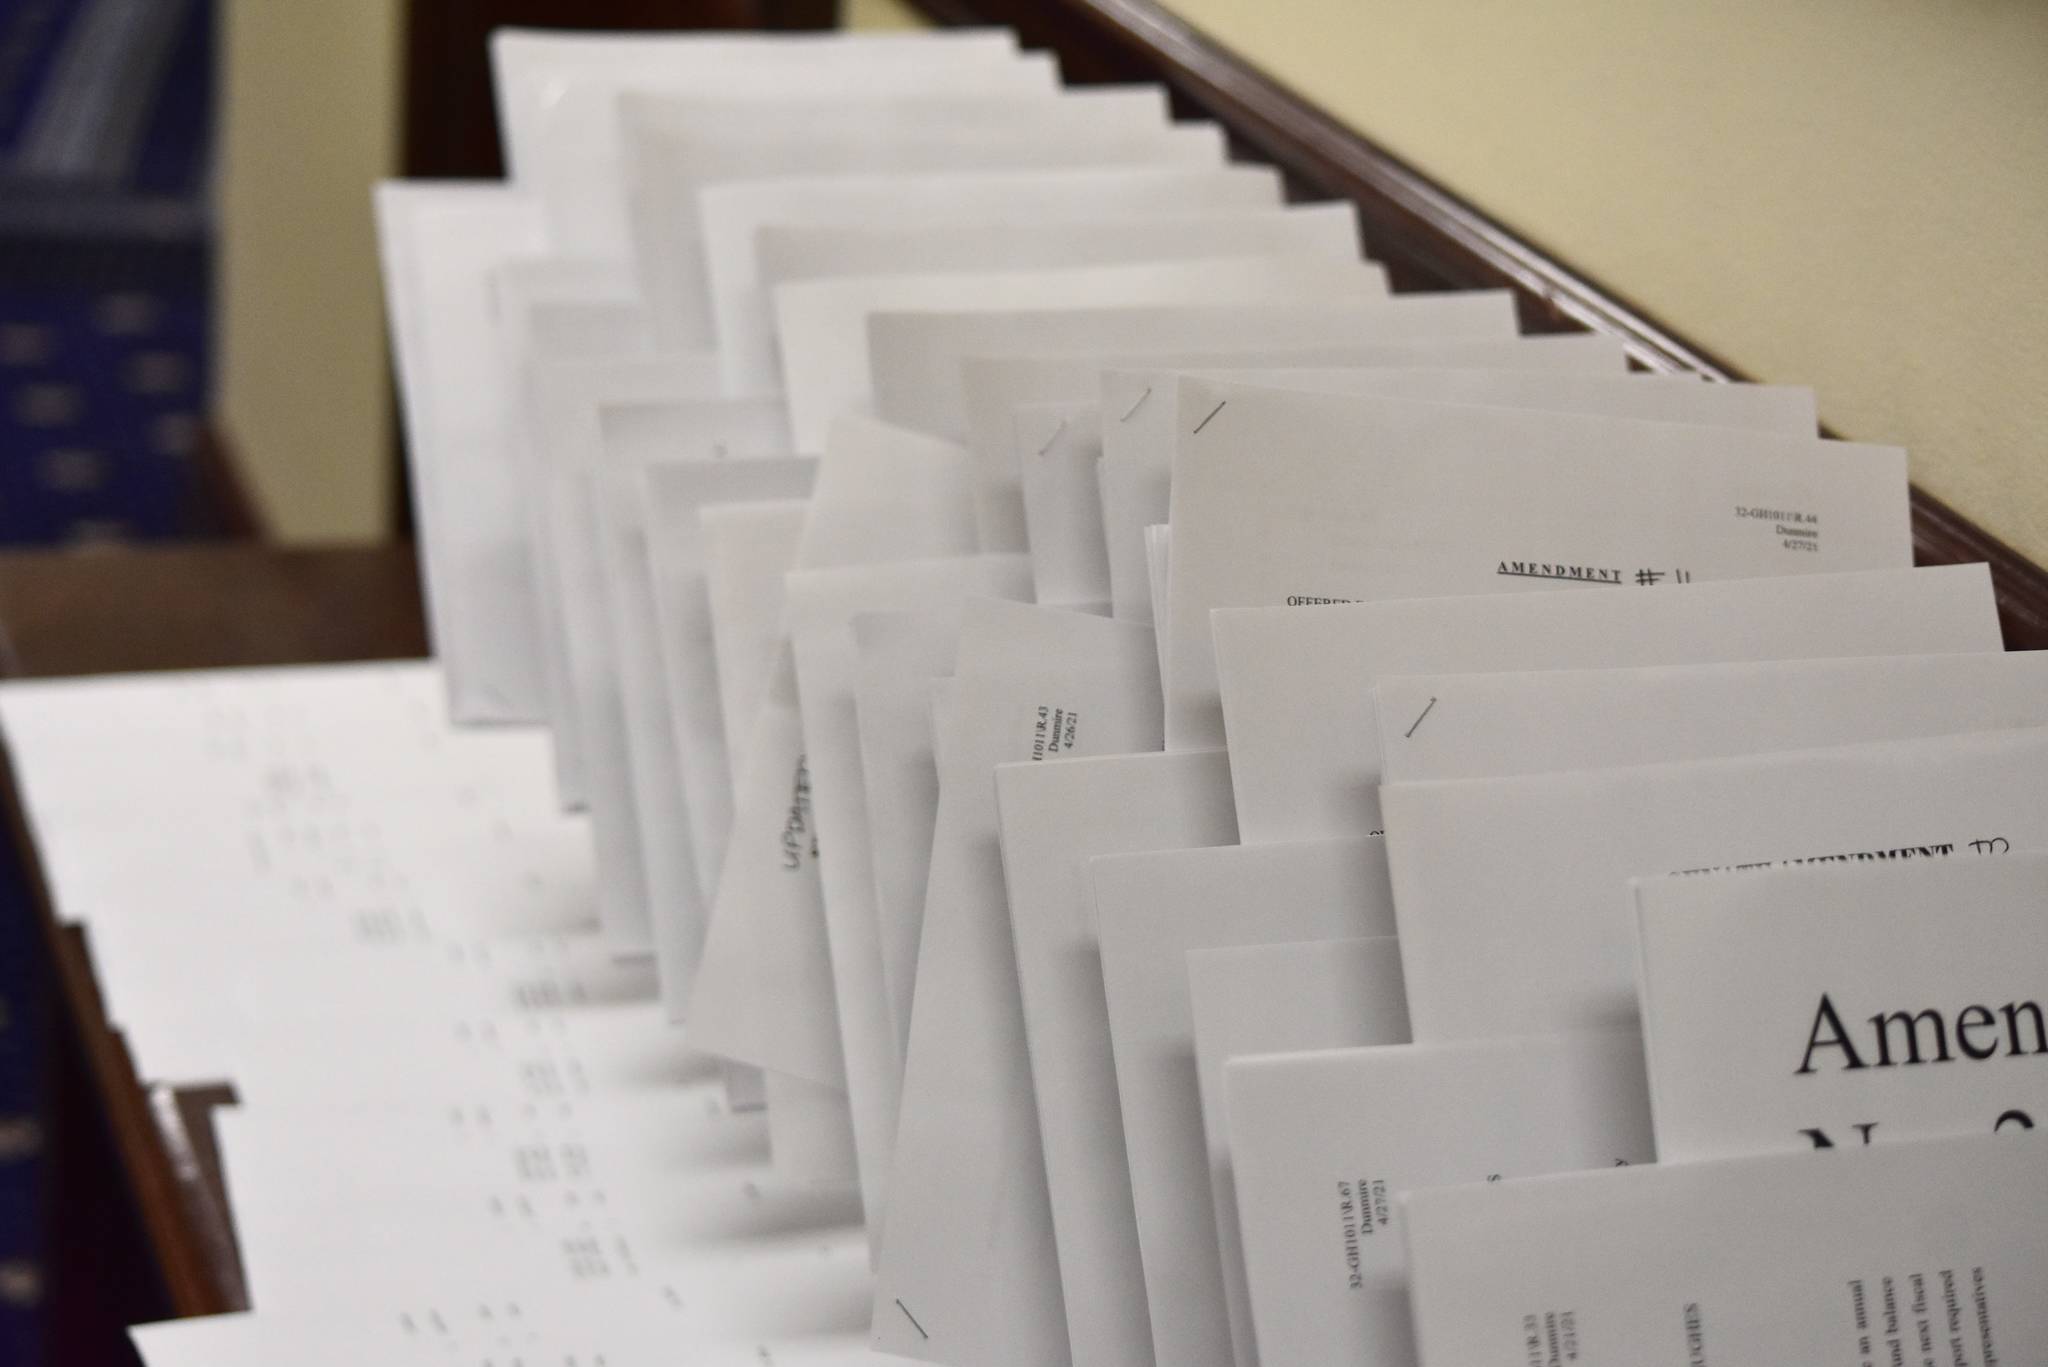 Dozens of amendments to a bill extending the state's disaster declaration are laid out on a table outside the Senate chambers on Wednesday, April 28, 2021. Lawmakers eventually passed the bill, but didn't adjourned until late in the evening. (Peter Segall / Juneau Empire.)